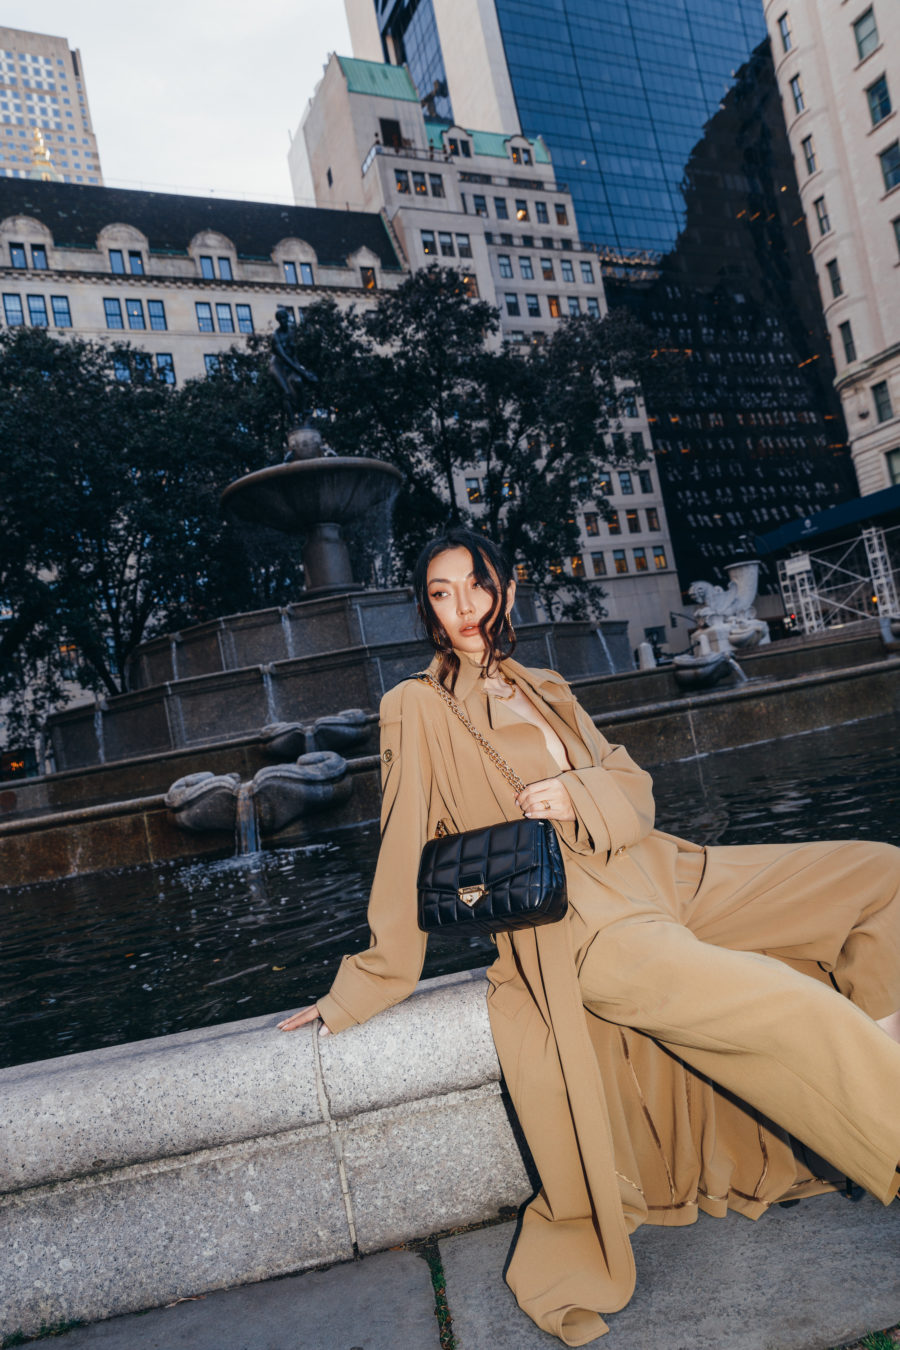 jessica wang wearing michael kors outfit and sharing black friday sales // Jessica Wang - Notjessfashion.com